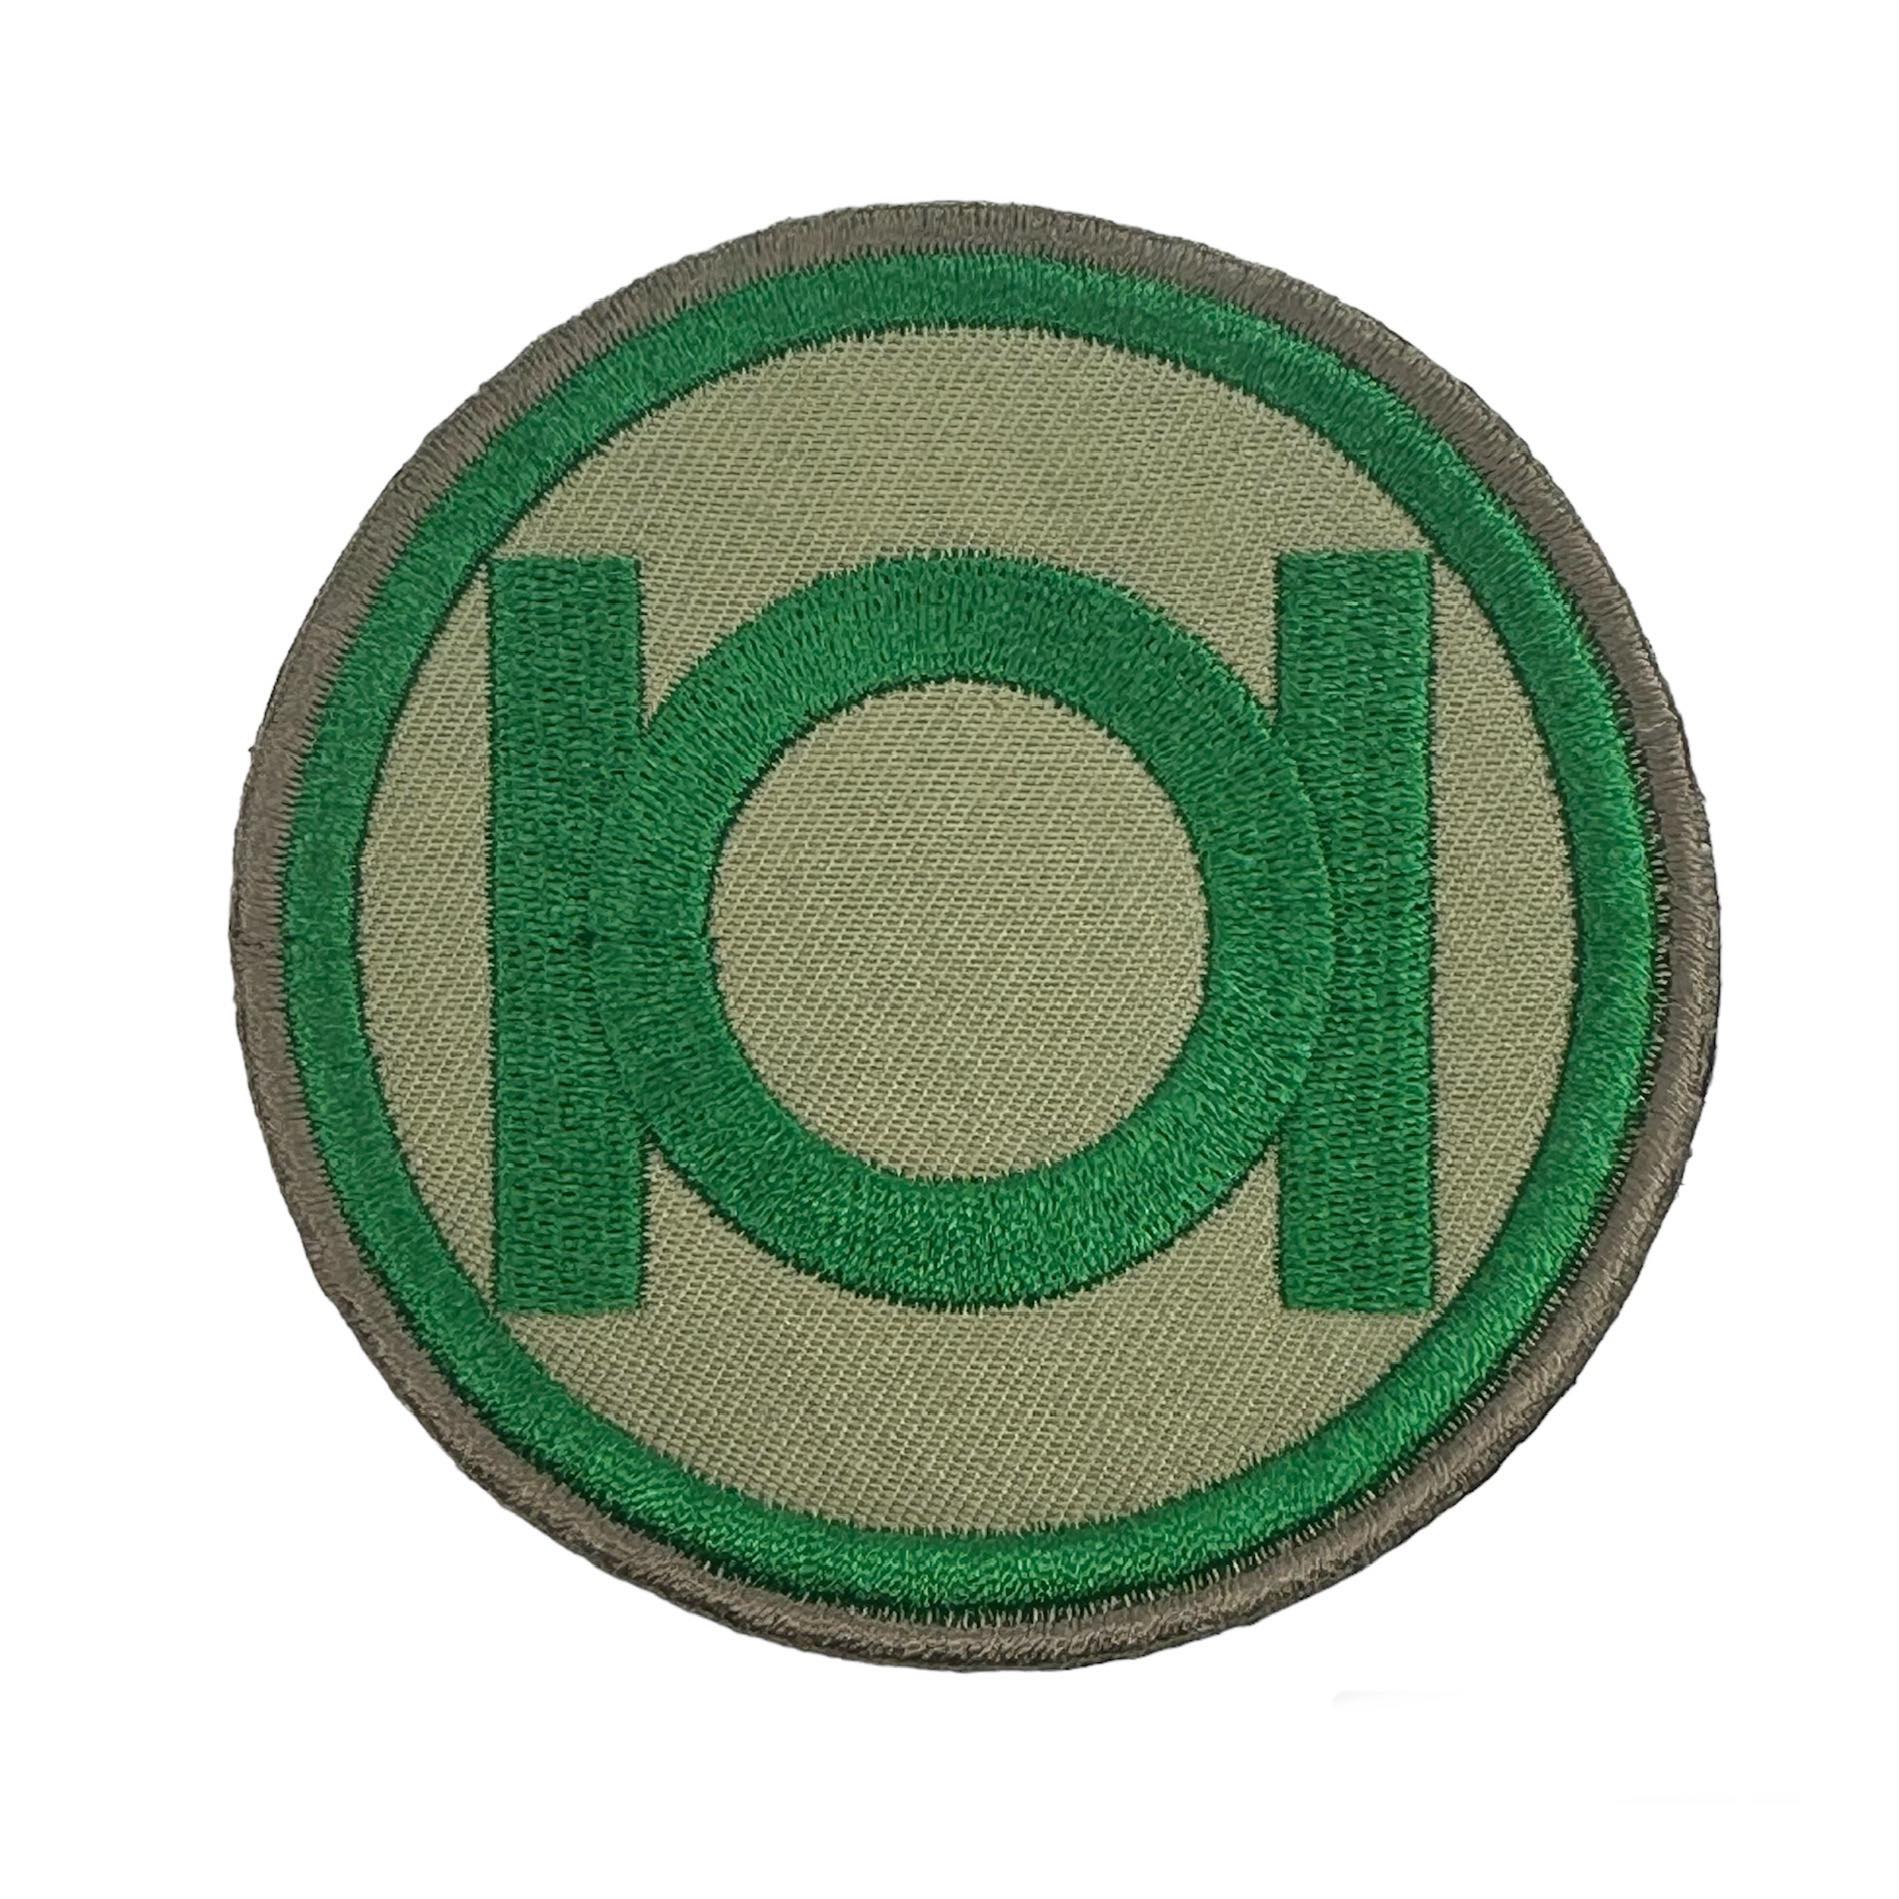 Embroidery Patch - Green Lantern